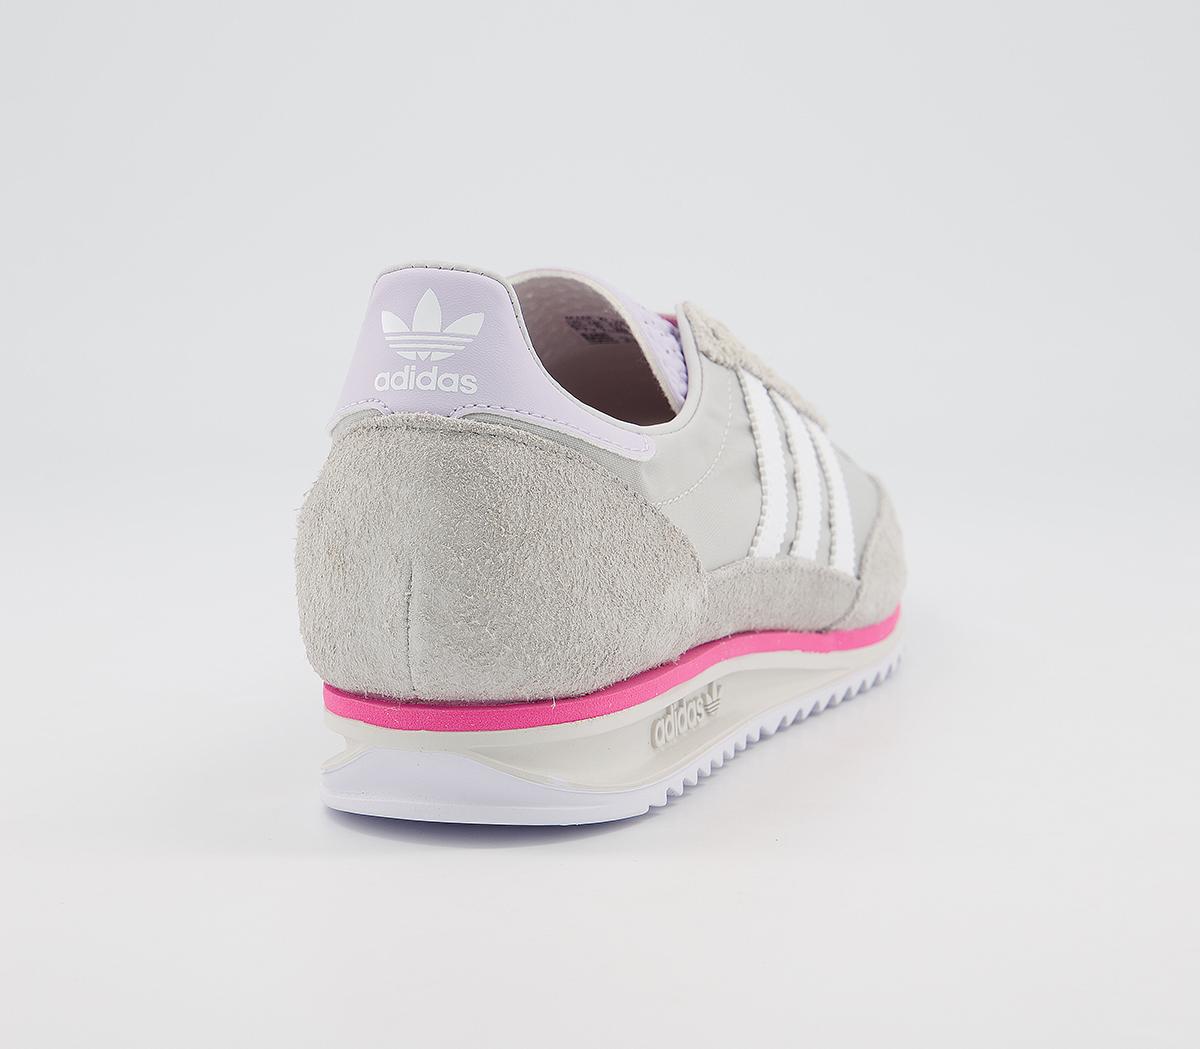 adidas Sl 72 Trainers Grey One White Grey Two - Women's Trainers